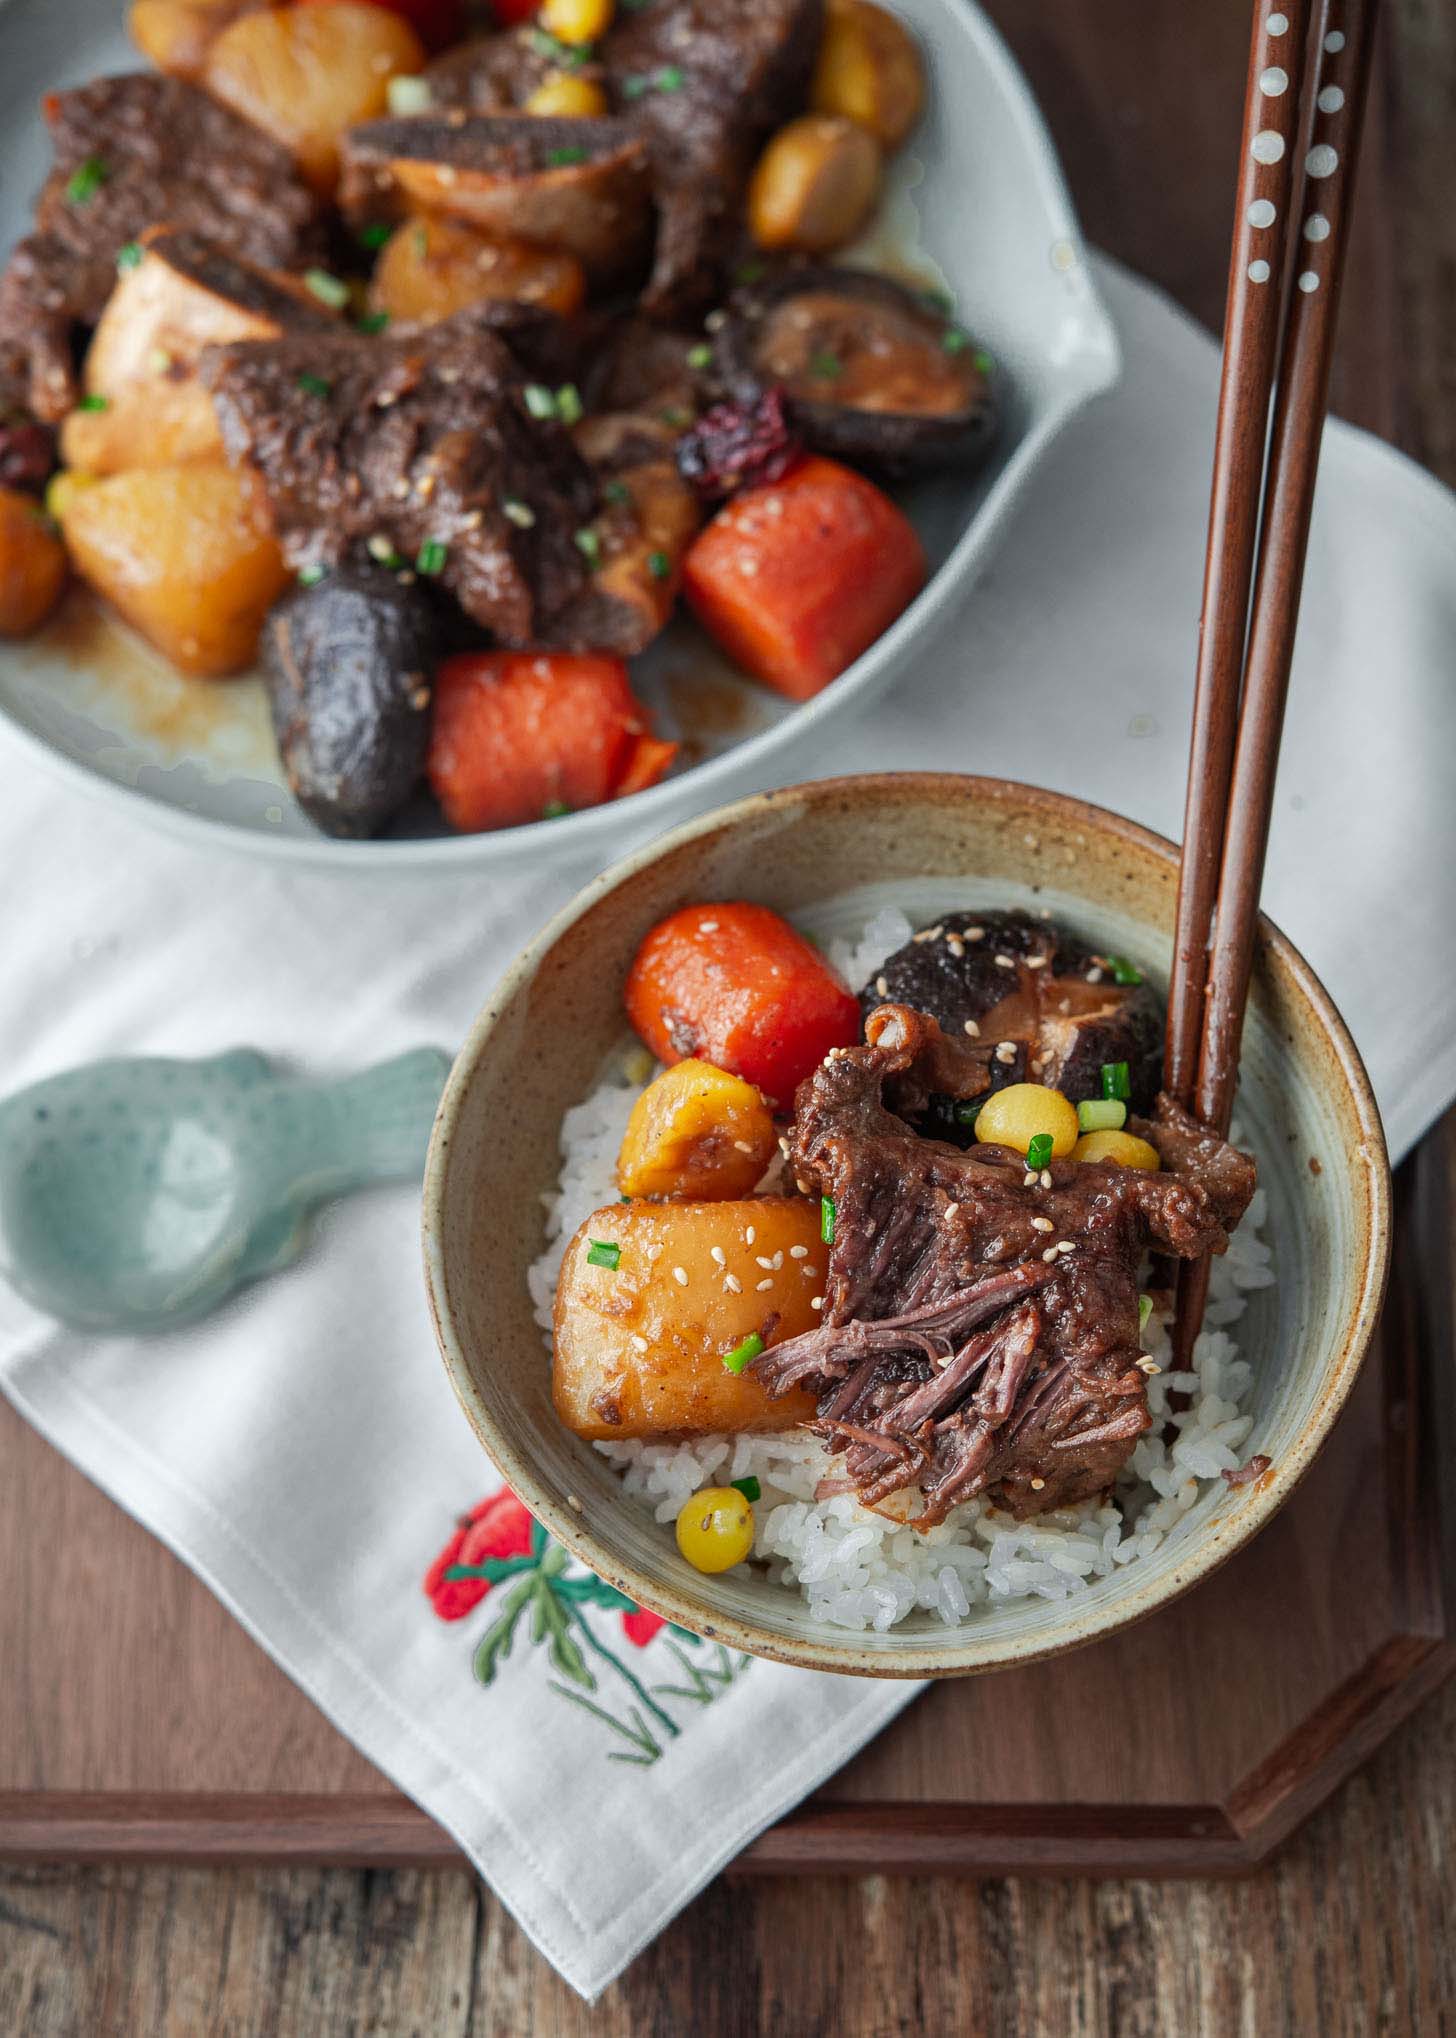 Braised Korean short ribs with vegetables served with rice.